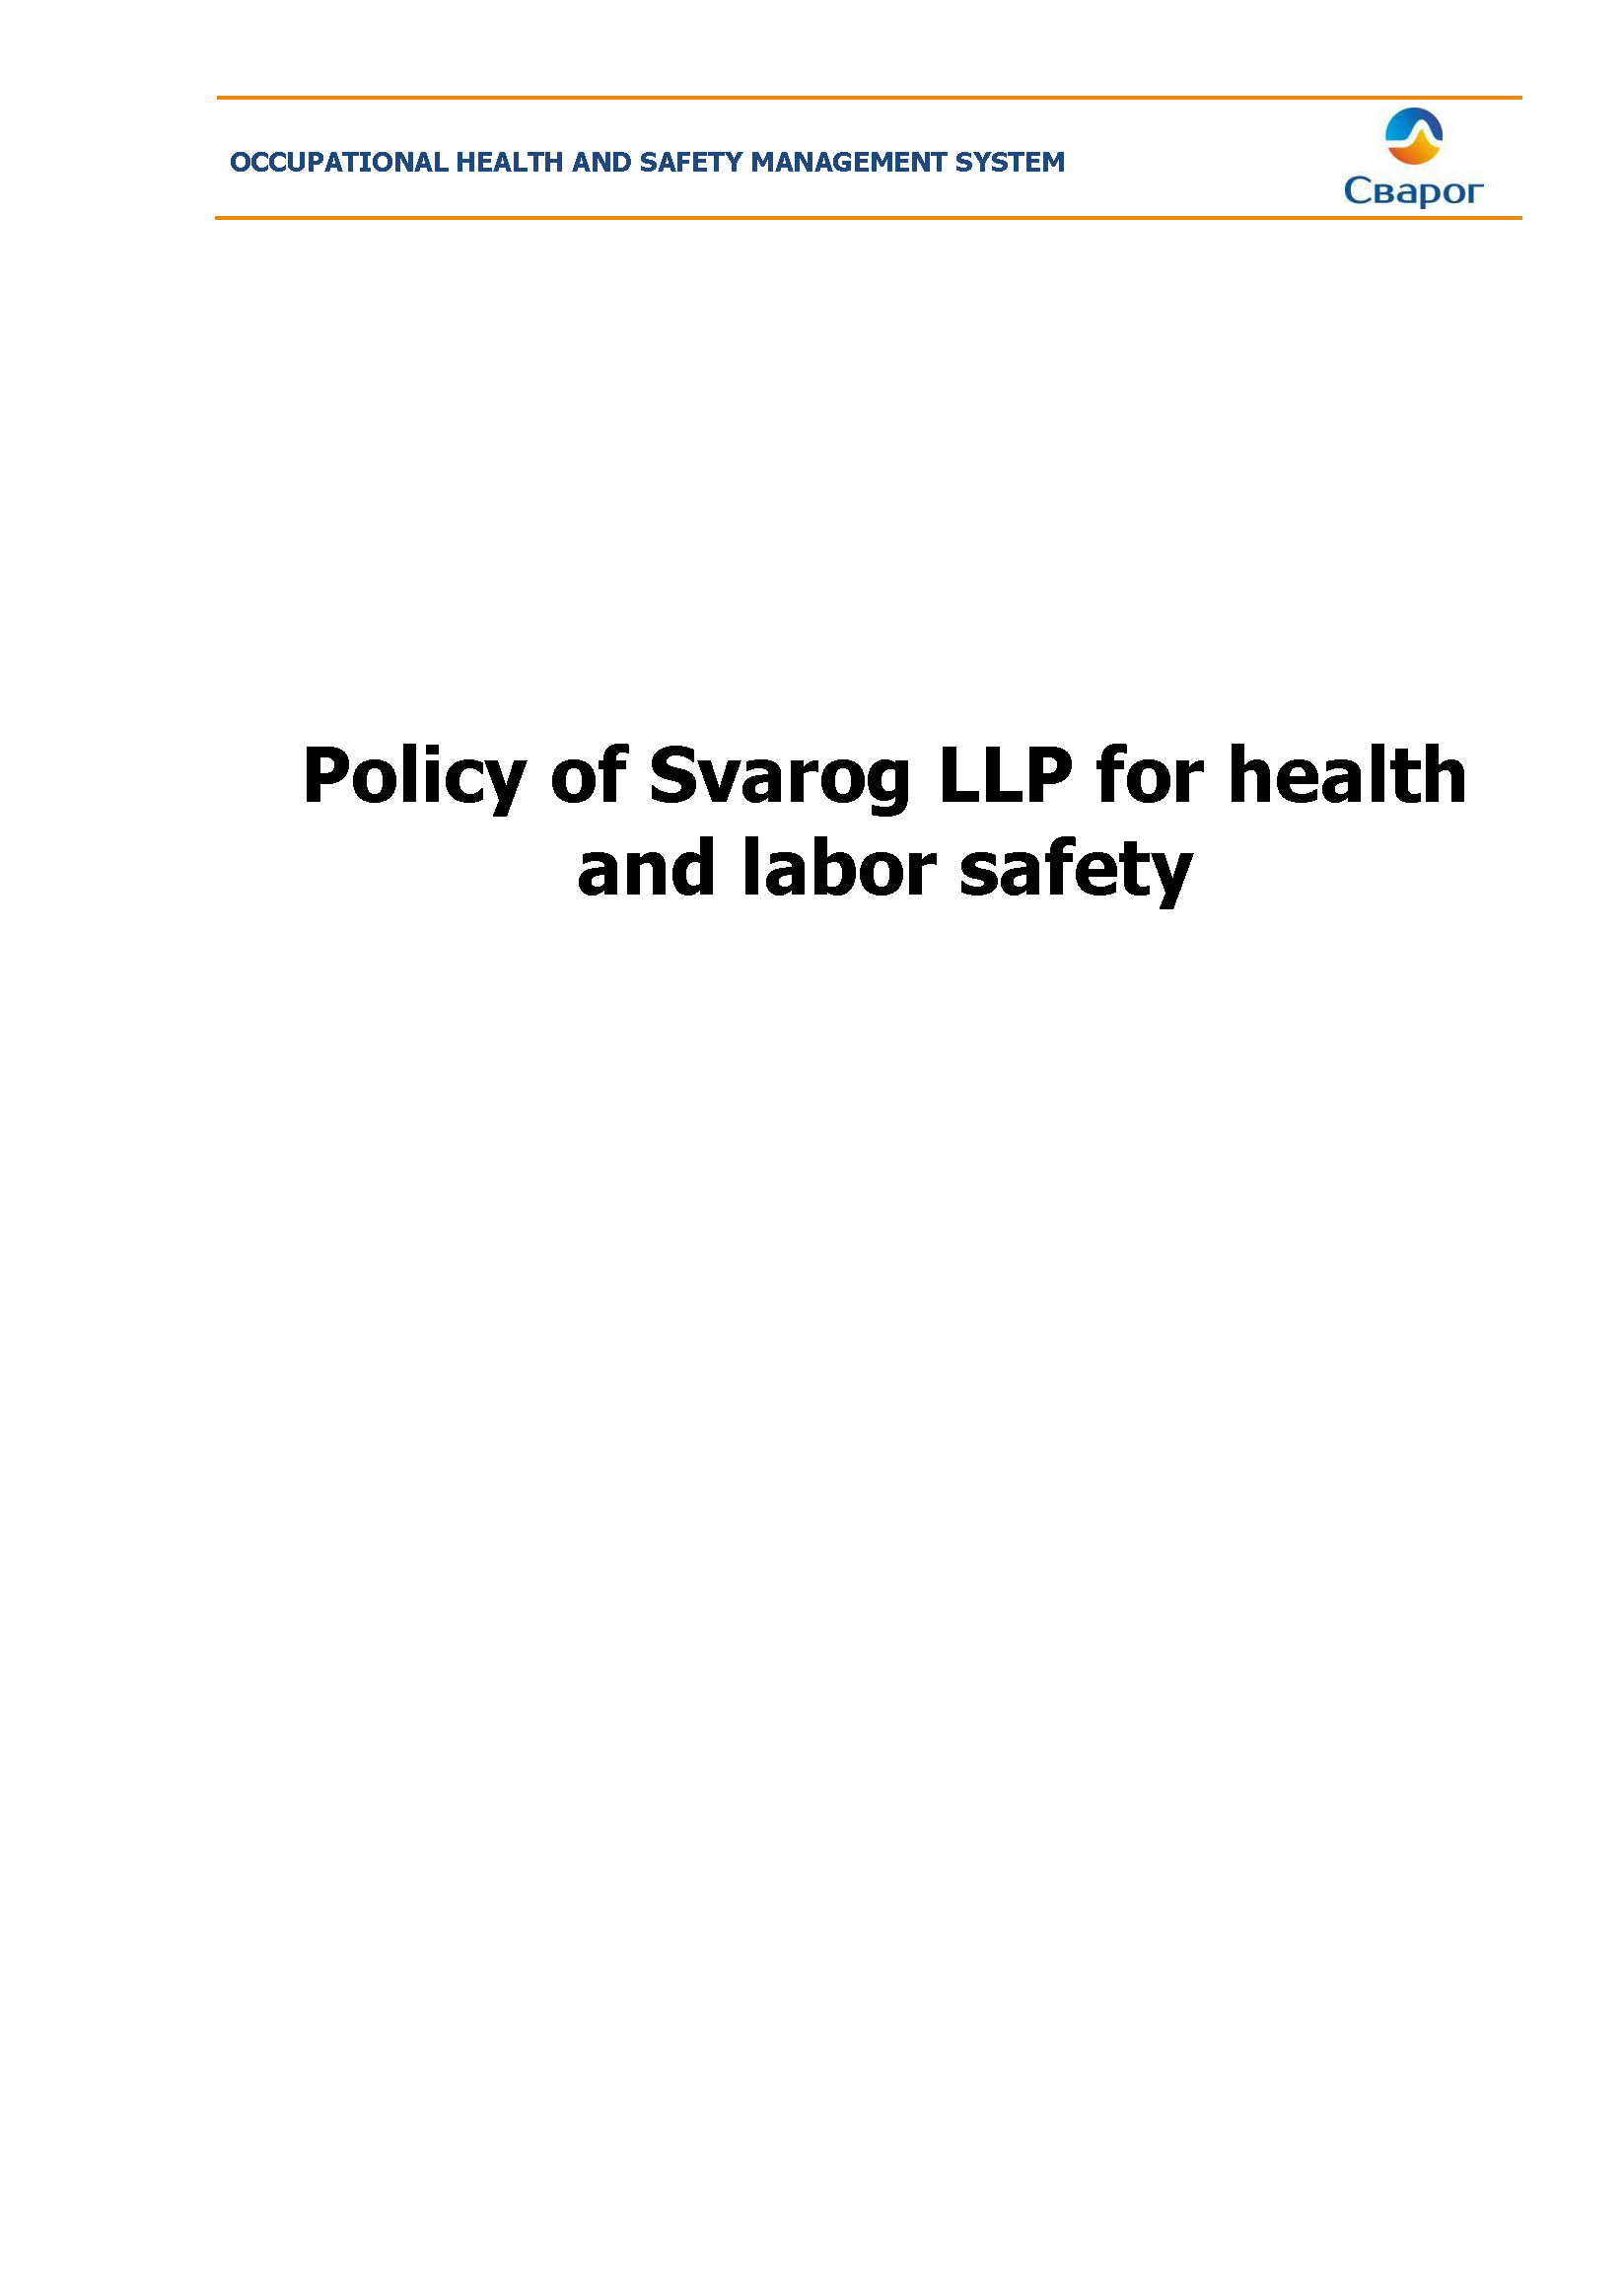 Policy of Svarog LLP for health and labor safety